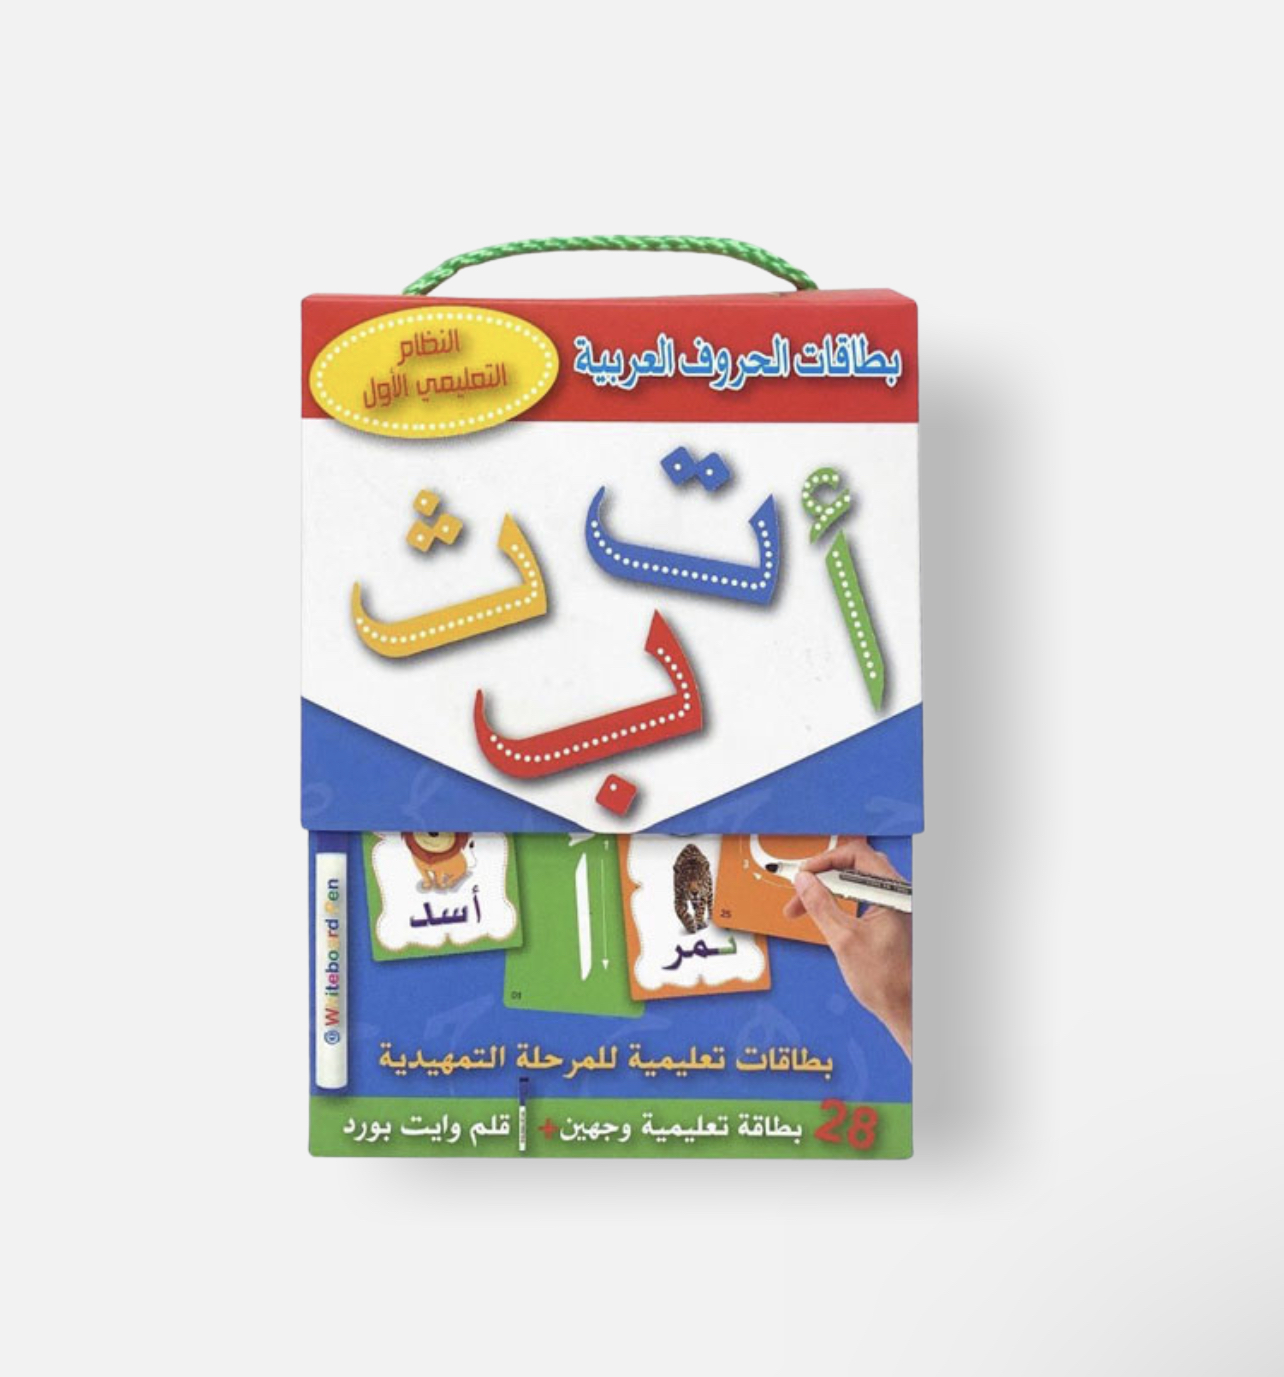 28 Flashcards to learn Arabic letters